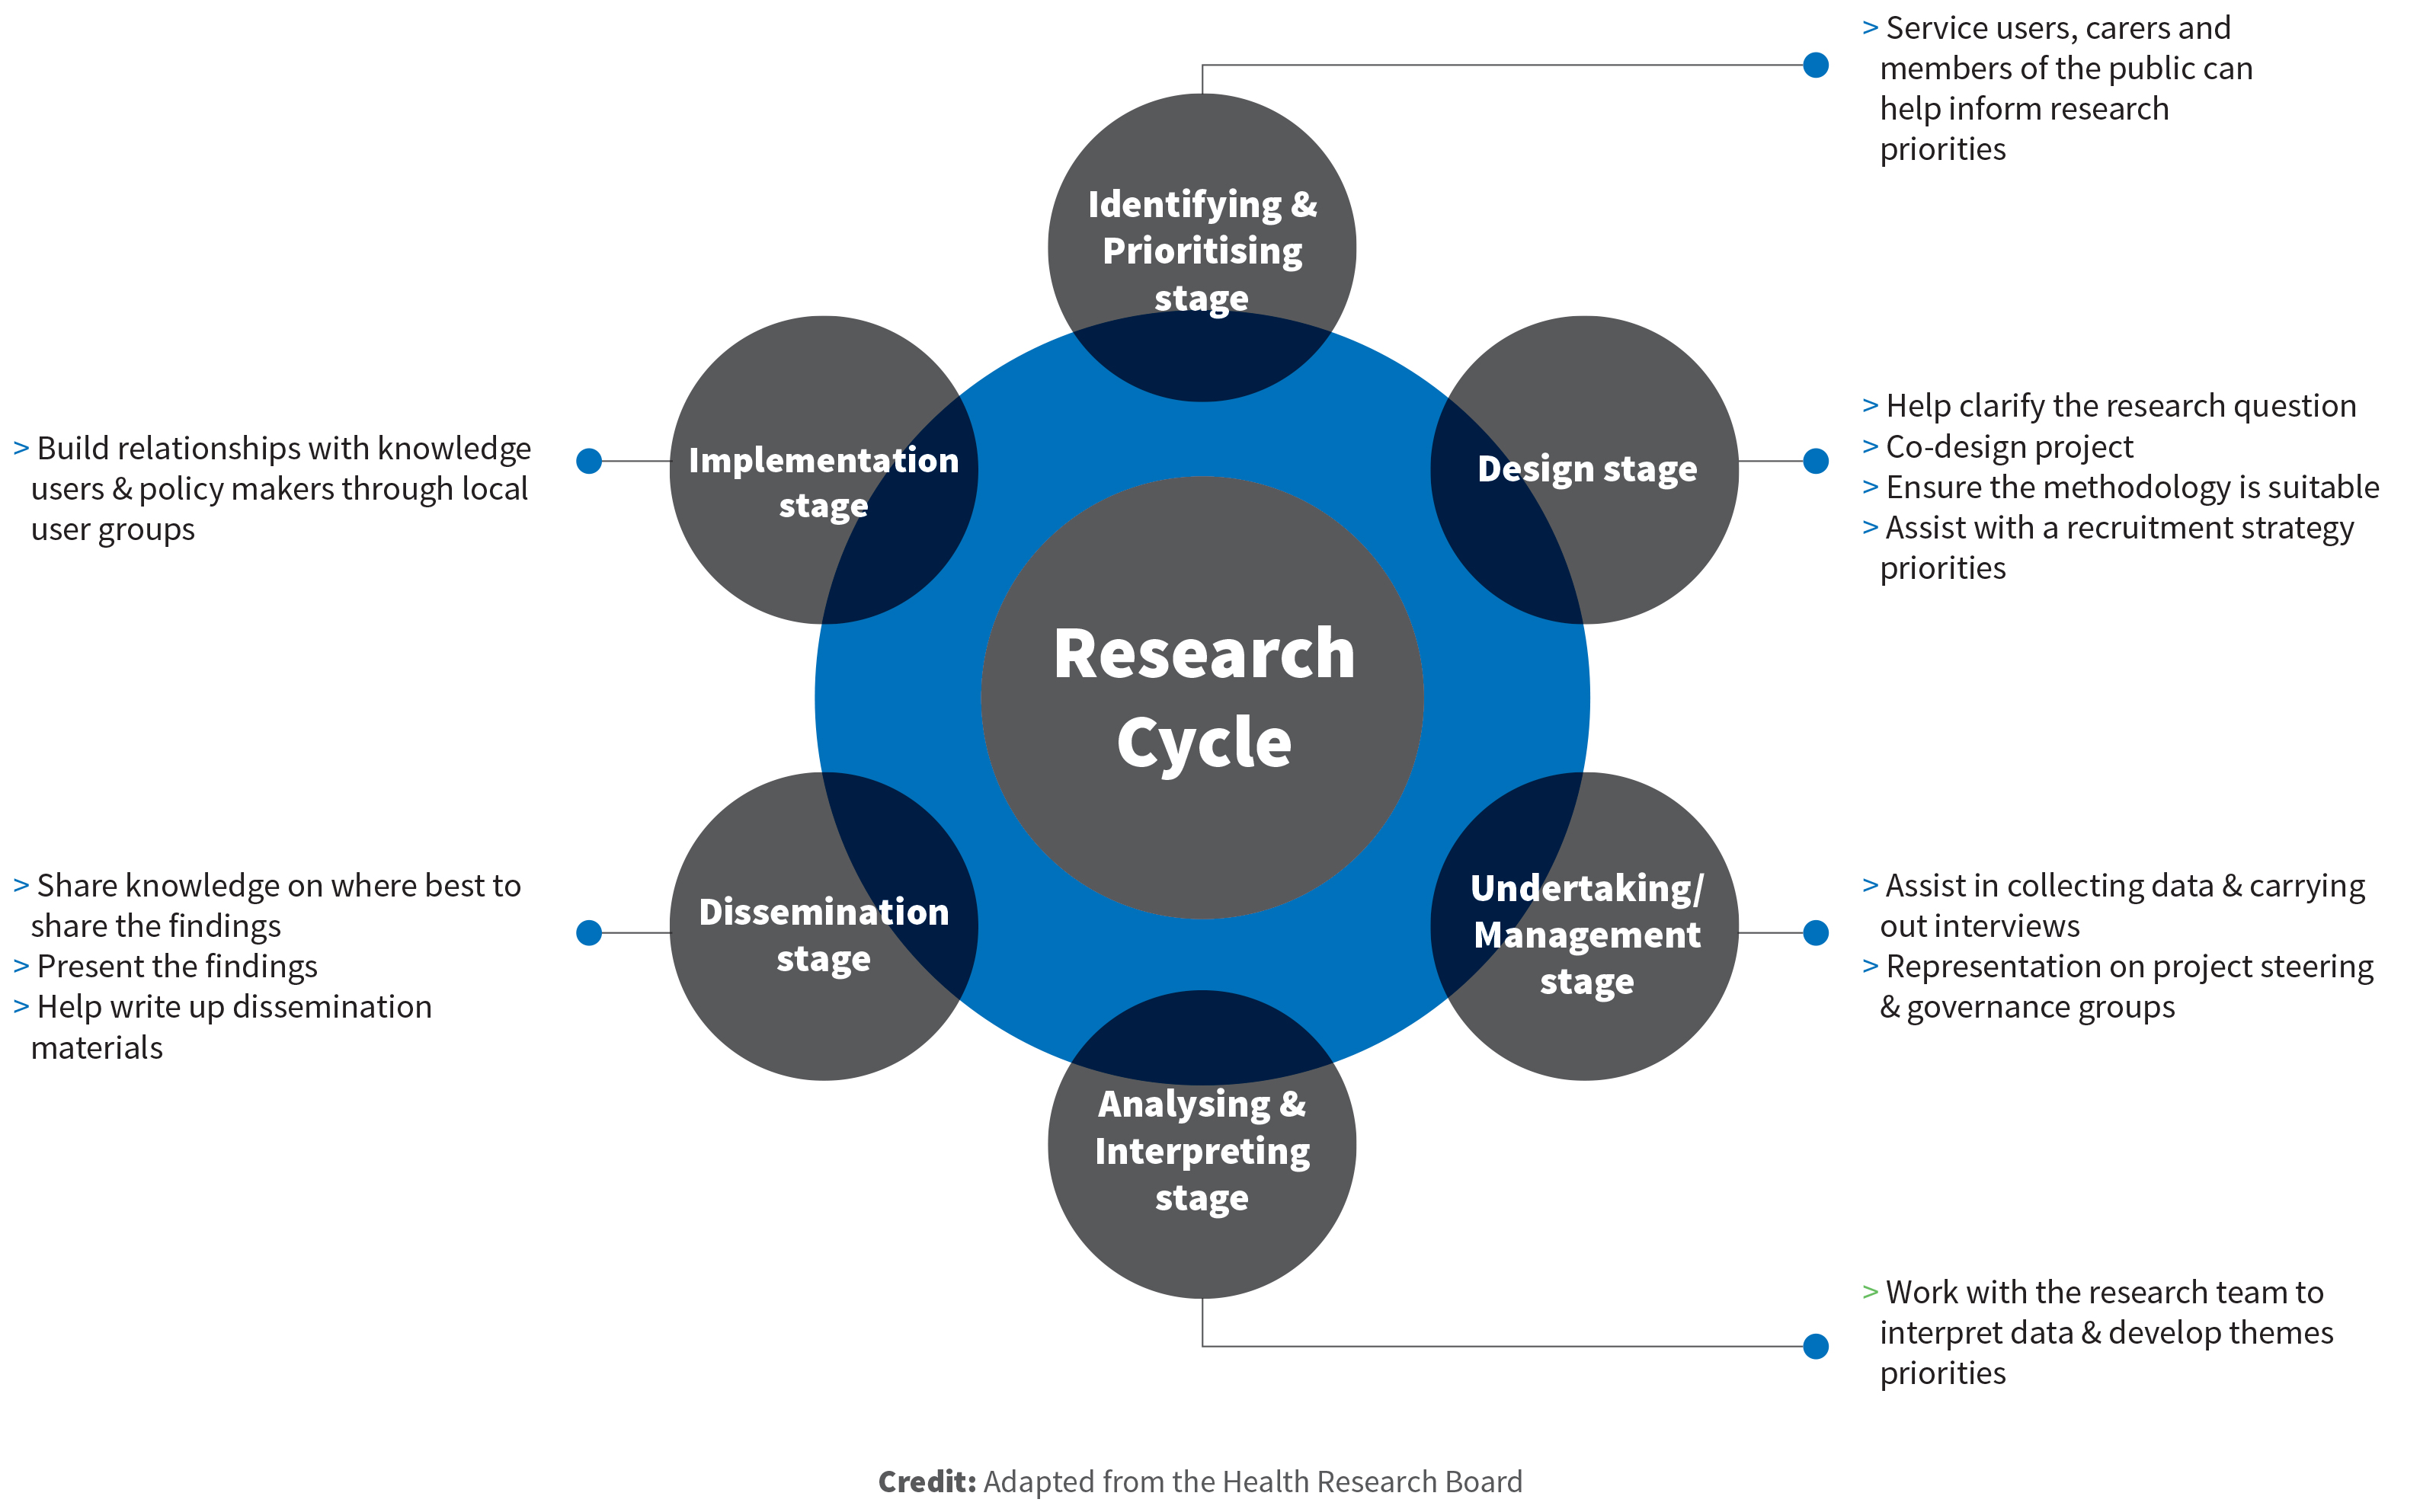 Research Cycle Image. Identifying and Priotitising stage. •	Service users, carers and members of the public can help inform research priorities Design Stage. •	Help clarify the research question 
•	Co-design project 
•	Ensure the methodology is suitable 
•	Assist with a recruitment strategy priorities.
      Undertaking/Management stage. •	Assist in collecting data & carrying out interviews 
•	Representation on project steering & governance groups 
Analysing and Interpreting stage. •	Work with the research team to interpret data & develop themes priorities 
      Dissemination stage.
      •	Share knowledge on where best to share the findings 
•	Present the findings 
•	Help write up dissemination materials 
Implementation stage.
      •	Build relationships with knowledge users & policy makers through local user groups 
